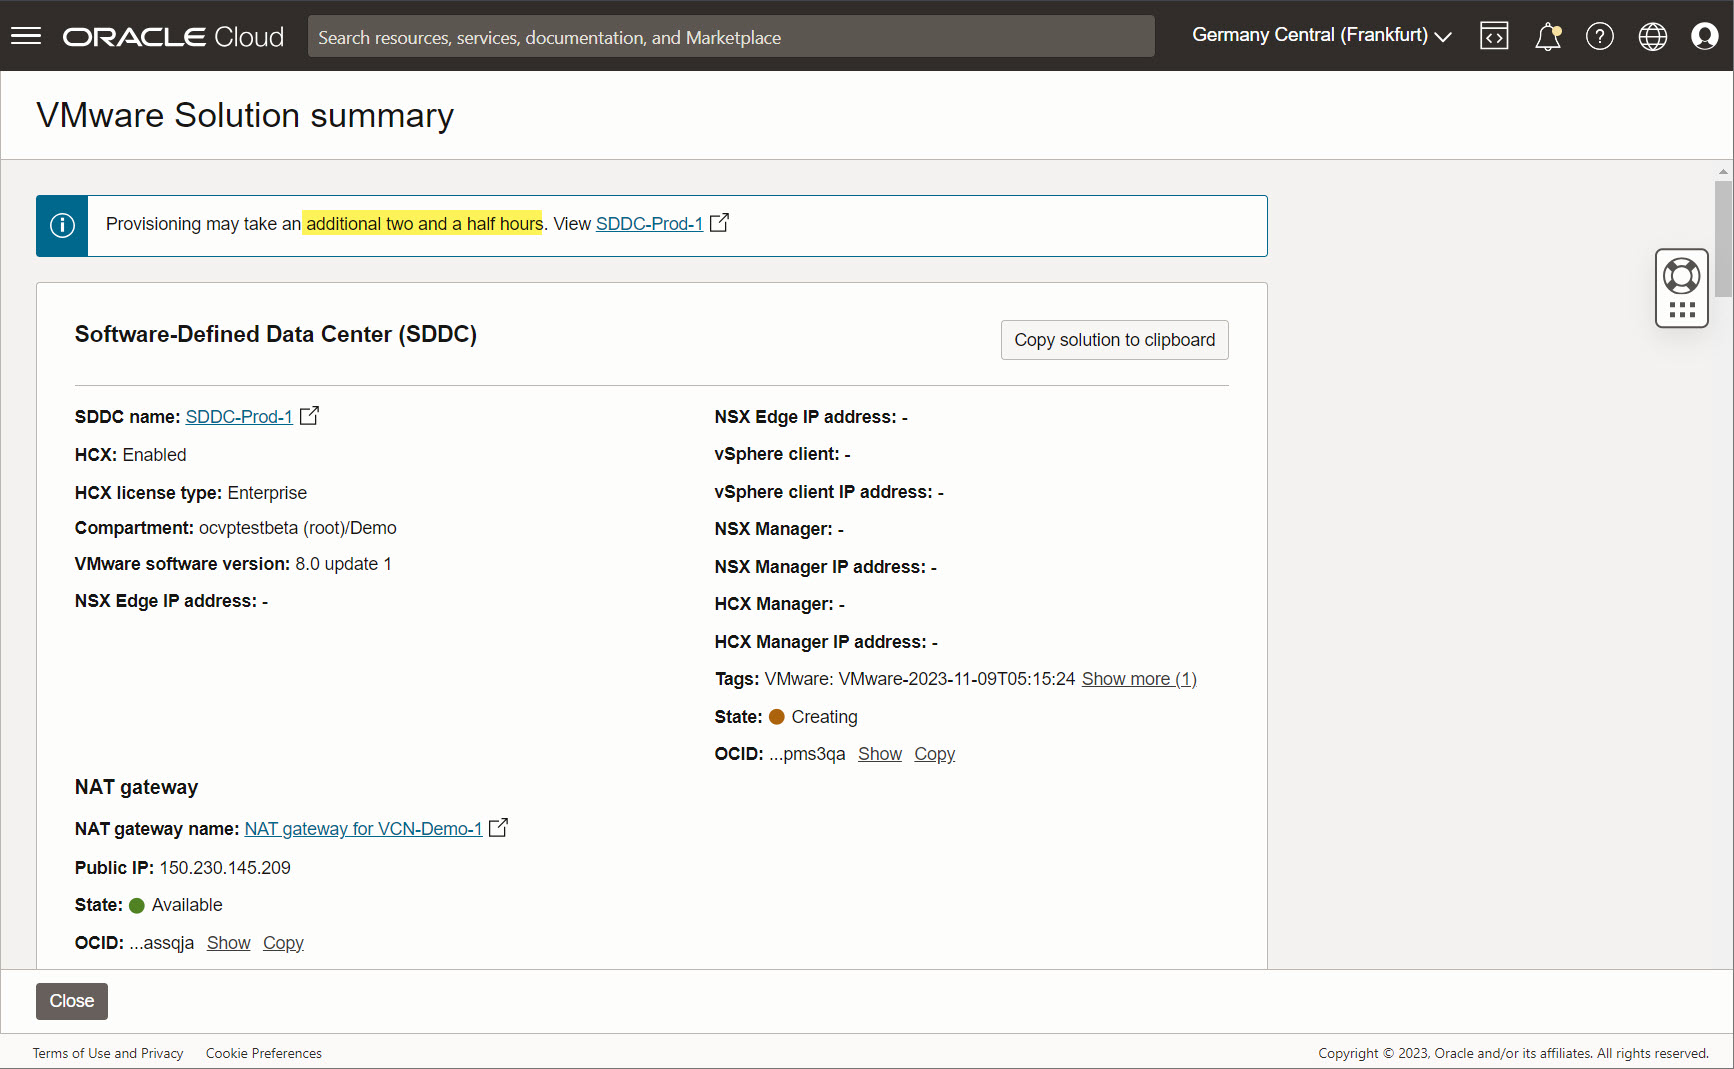 VMware Solution summary page